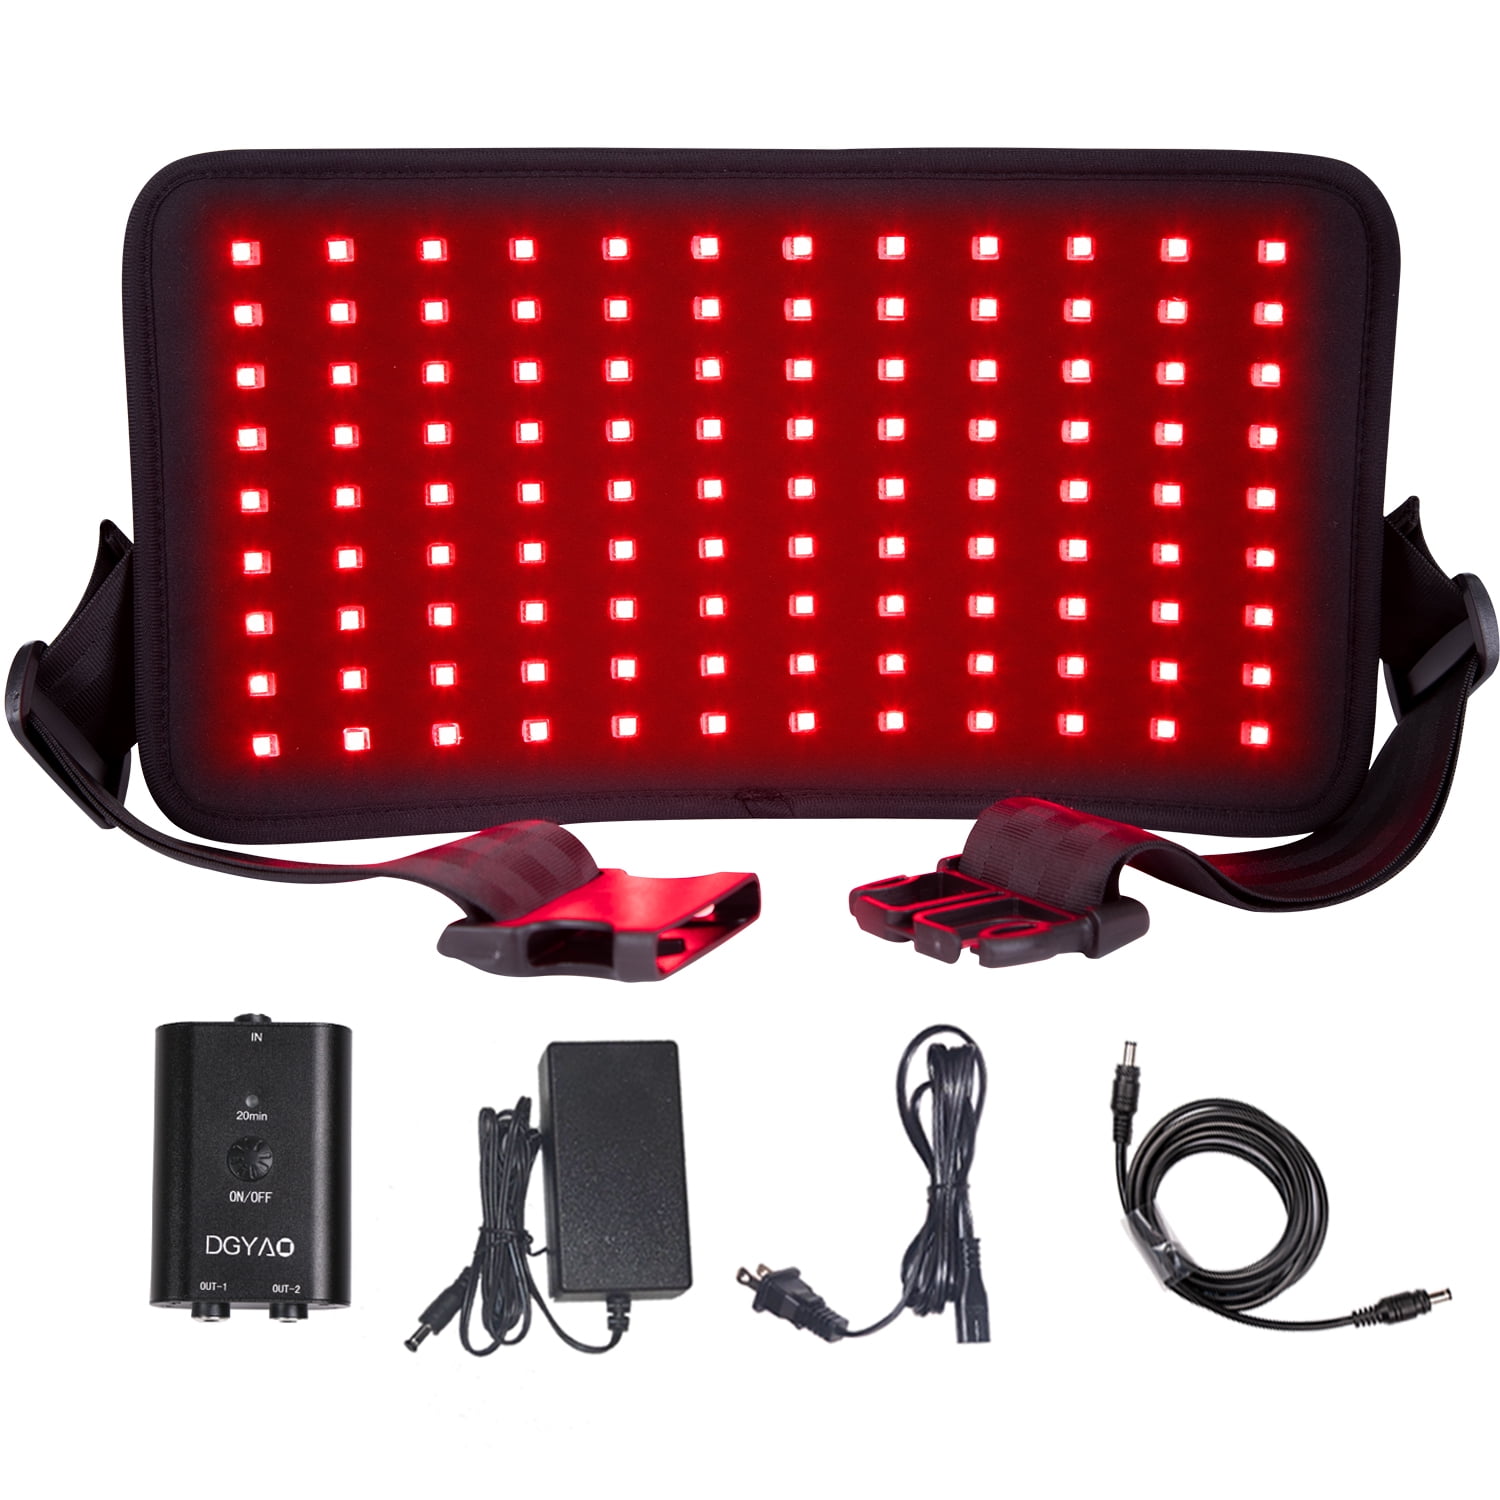 DGYAO New Red near Infrared Light Therapy Device with Pulse Mode Therapy Wrap for Pain Relief Blood Circulation Home Use - Walmart.com